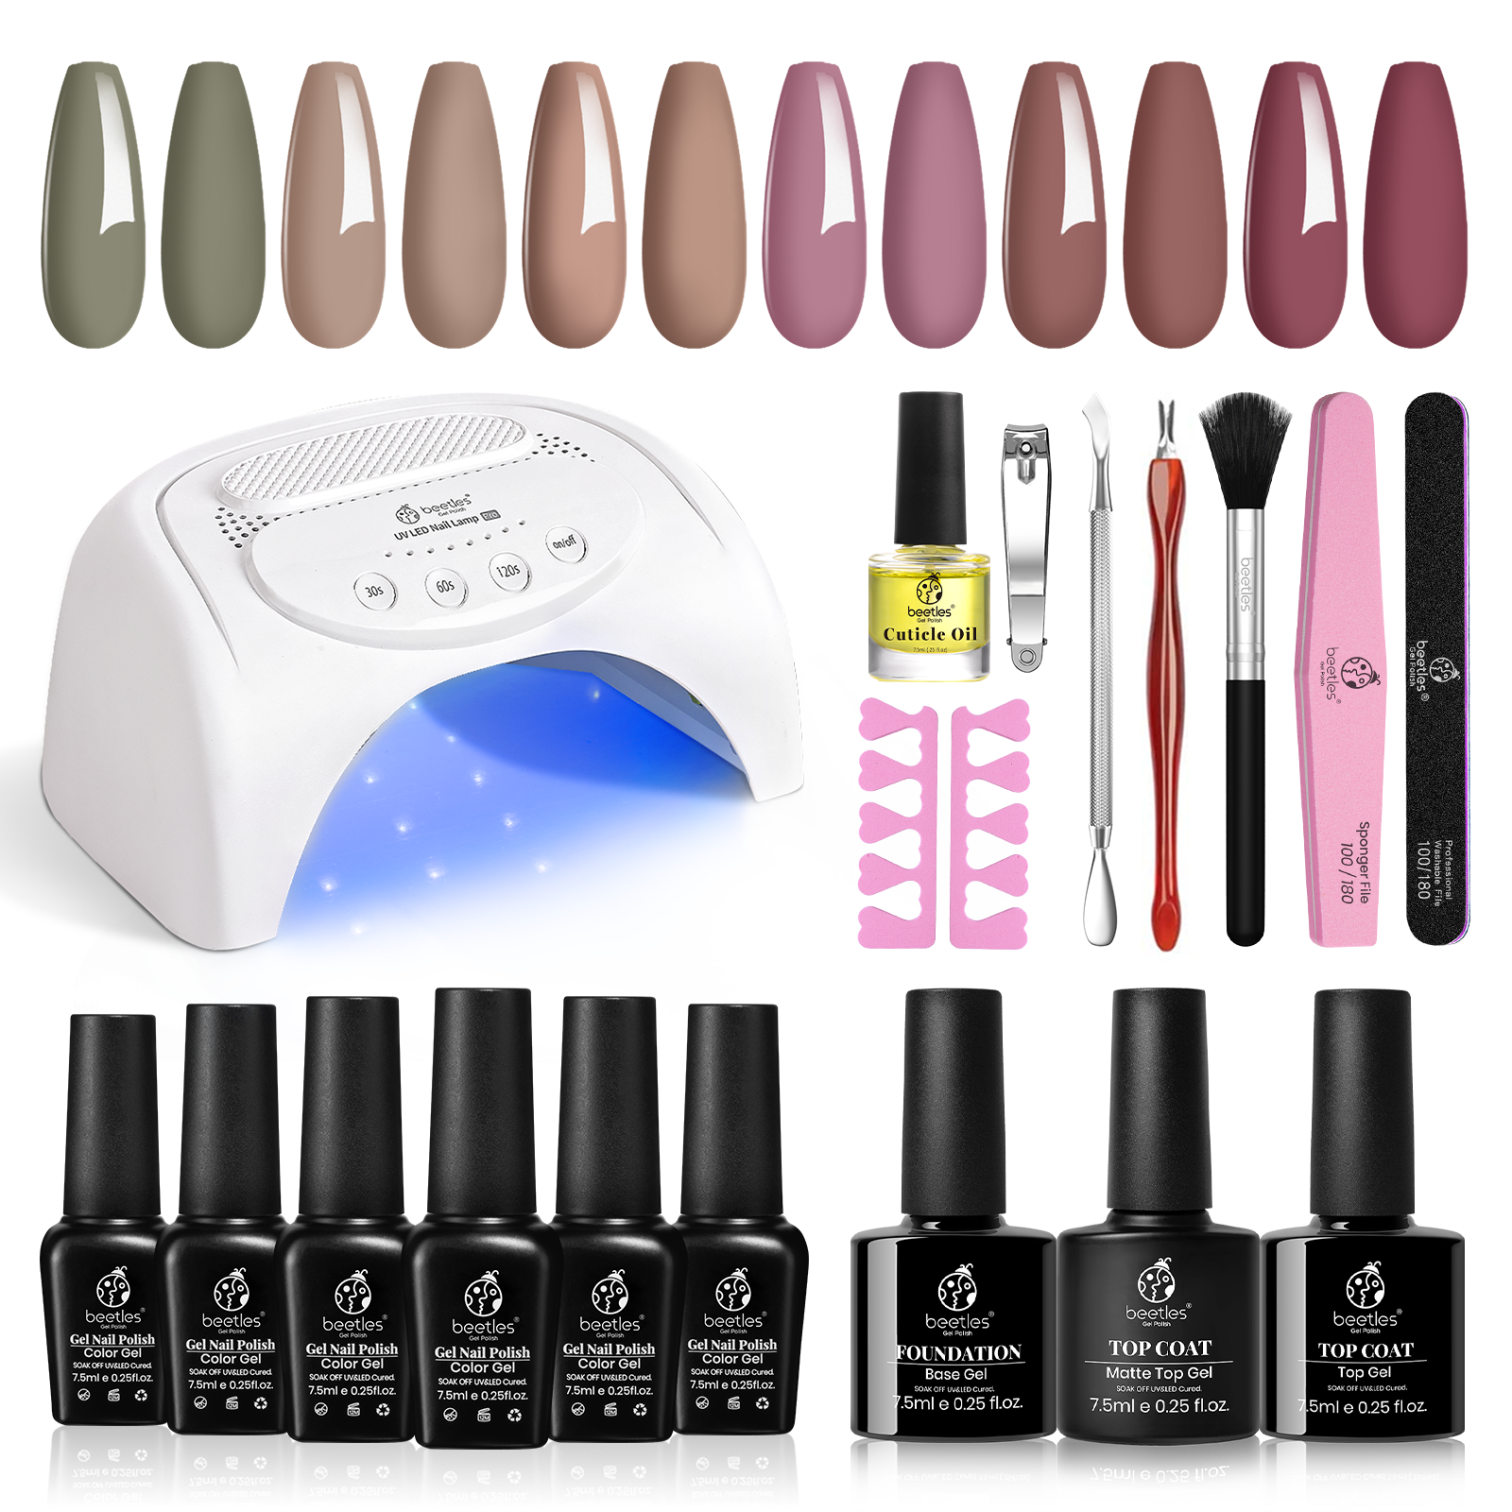 Beetles French White Glitter Gel Nail Polish Starter Kit with U V LED Light 48W Nail Lamp Gel Base Shiny Matte Top Coat Soak Off Nude Pink Gel Nail Polish Set Gel Manicure Mother's Day Gift for Women A-Nude Pink White